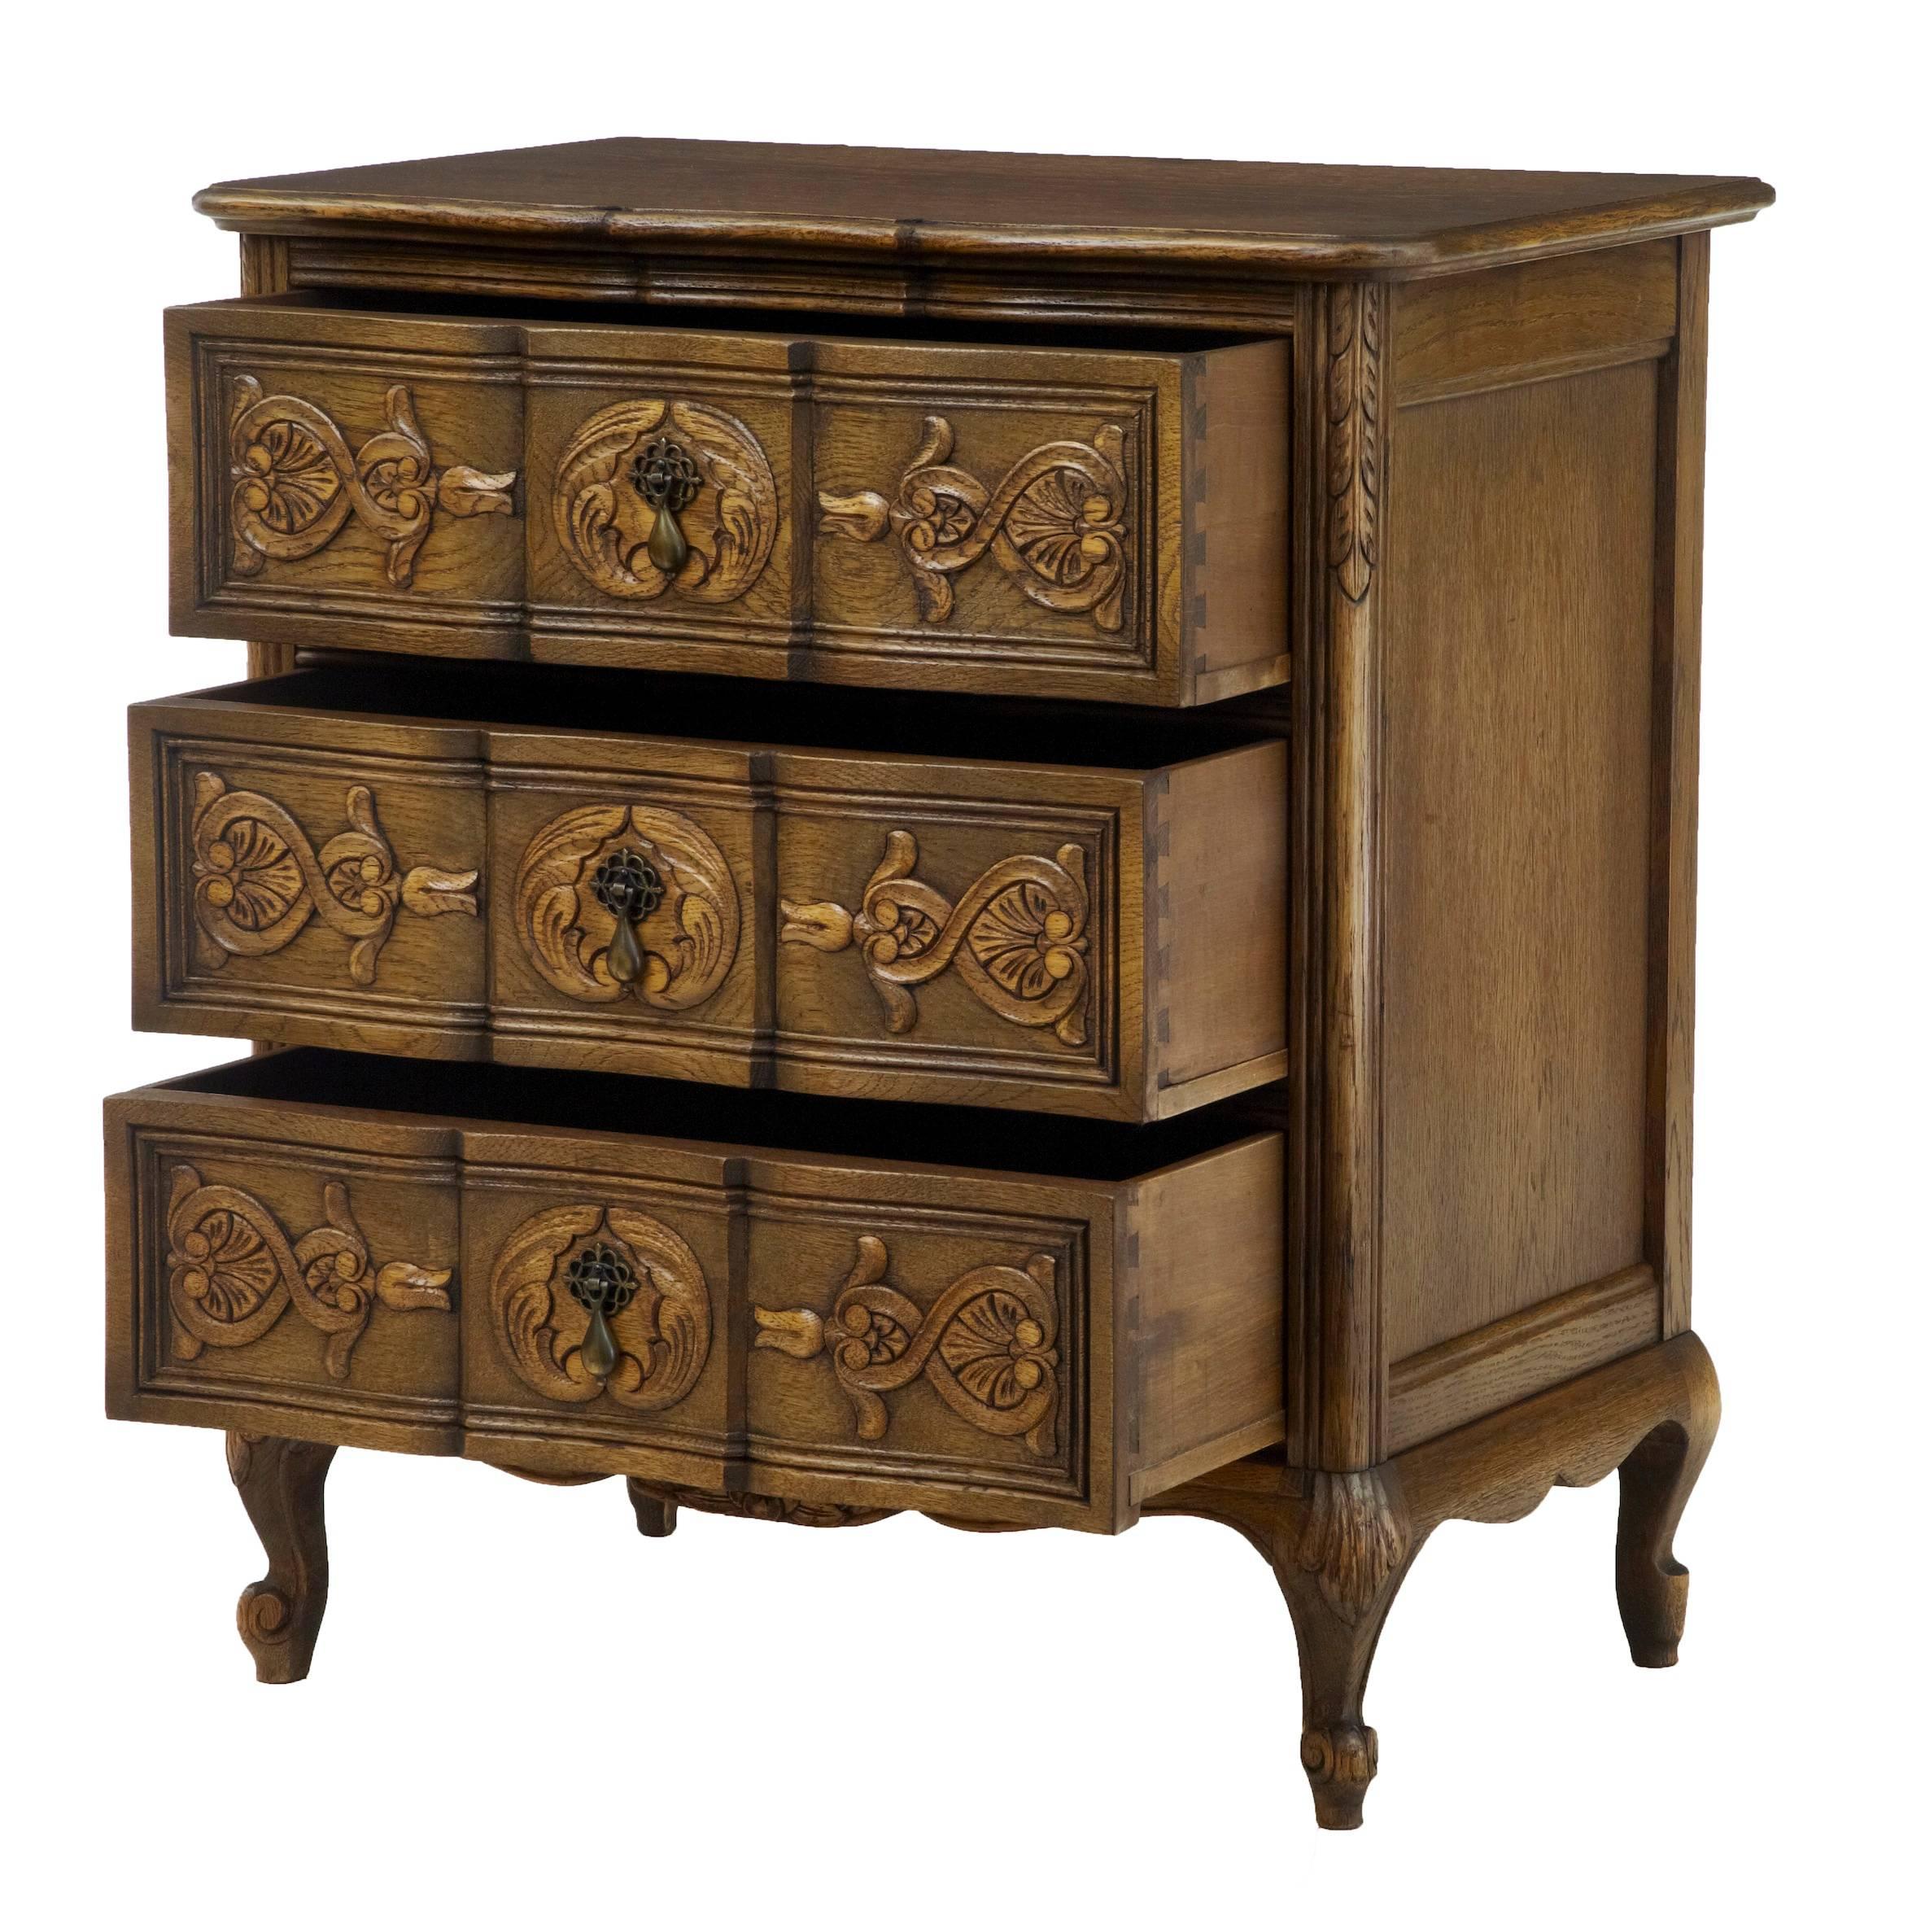 Good quality oak commode, circa 1960 in the French Provincial style.
Scallop shaped front.
Three drawers with drop handles.
Measures:
Height: 26